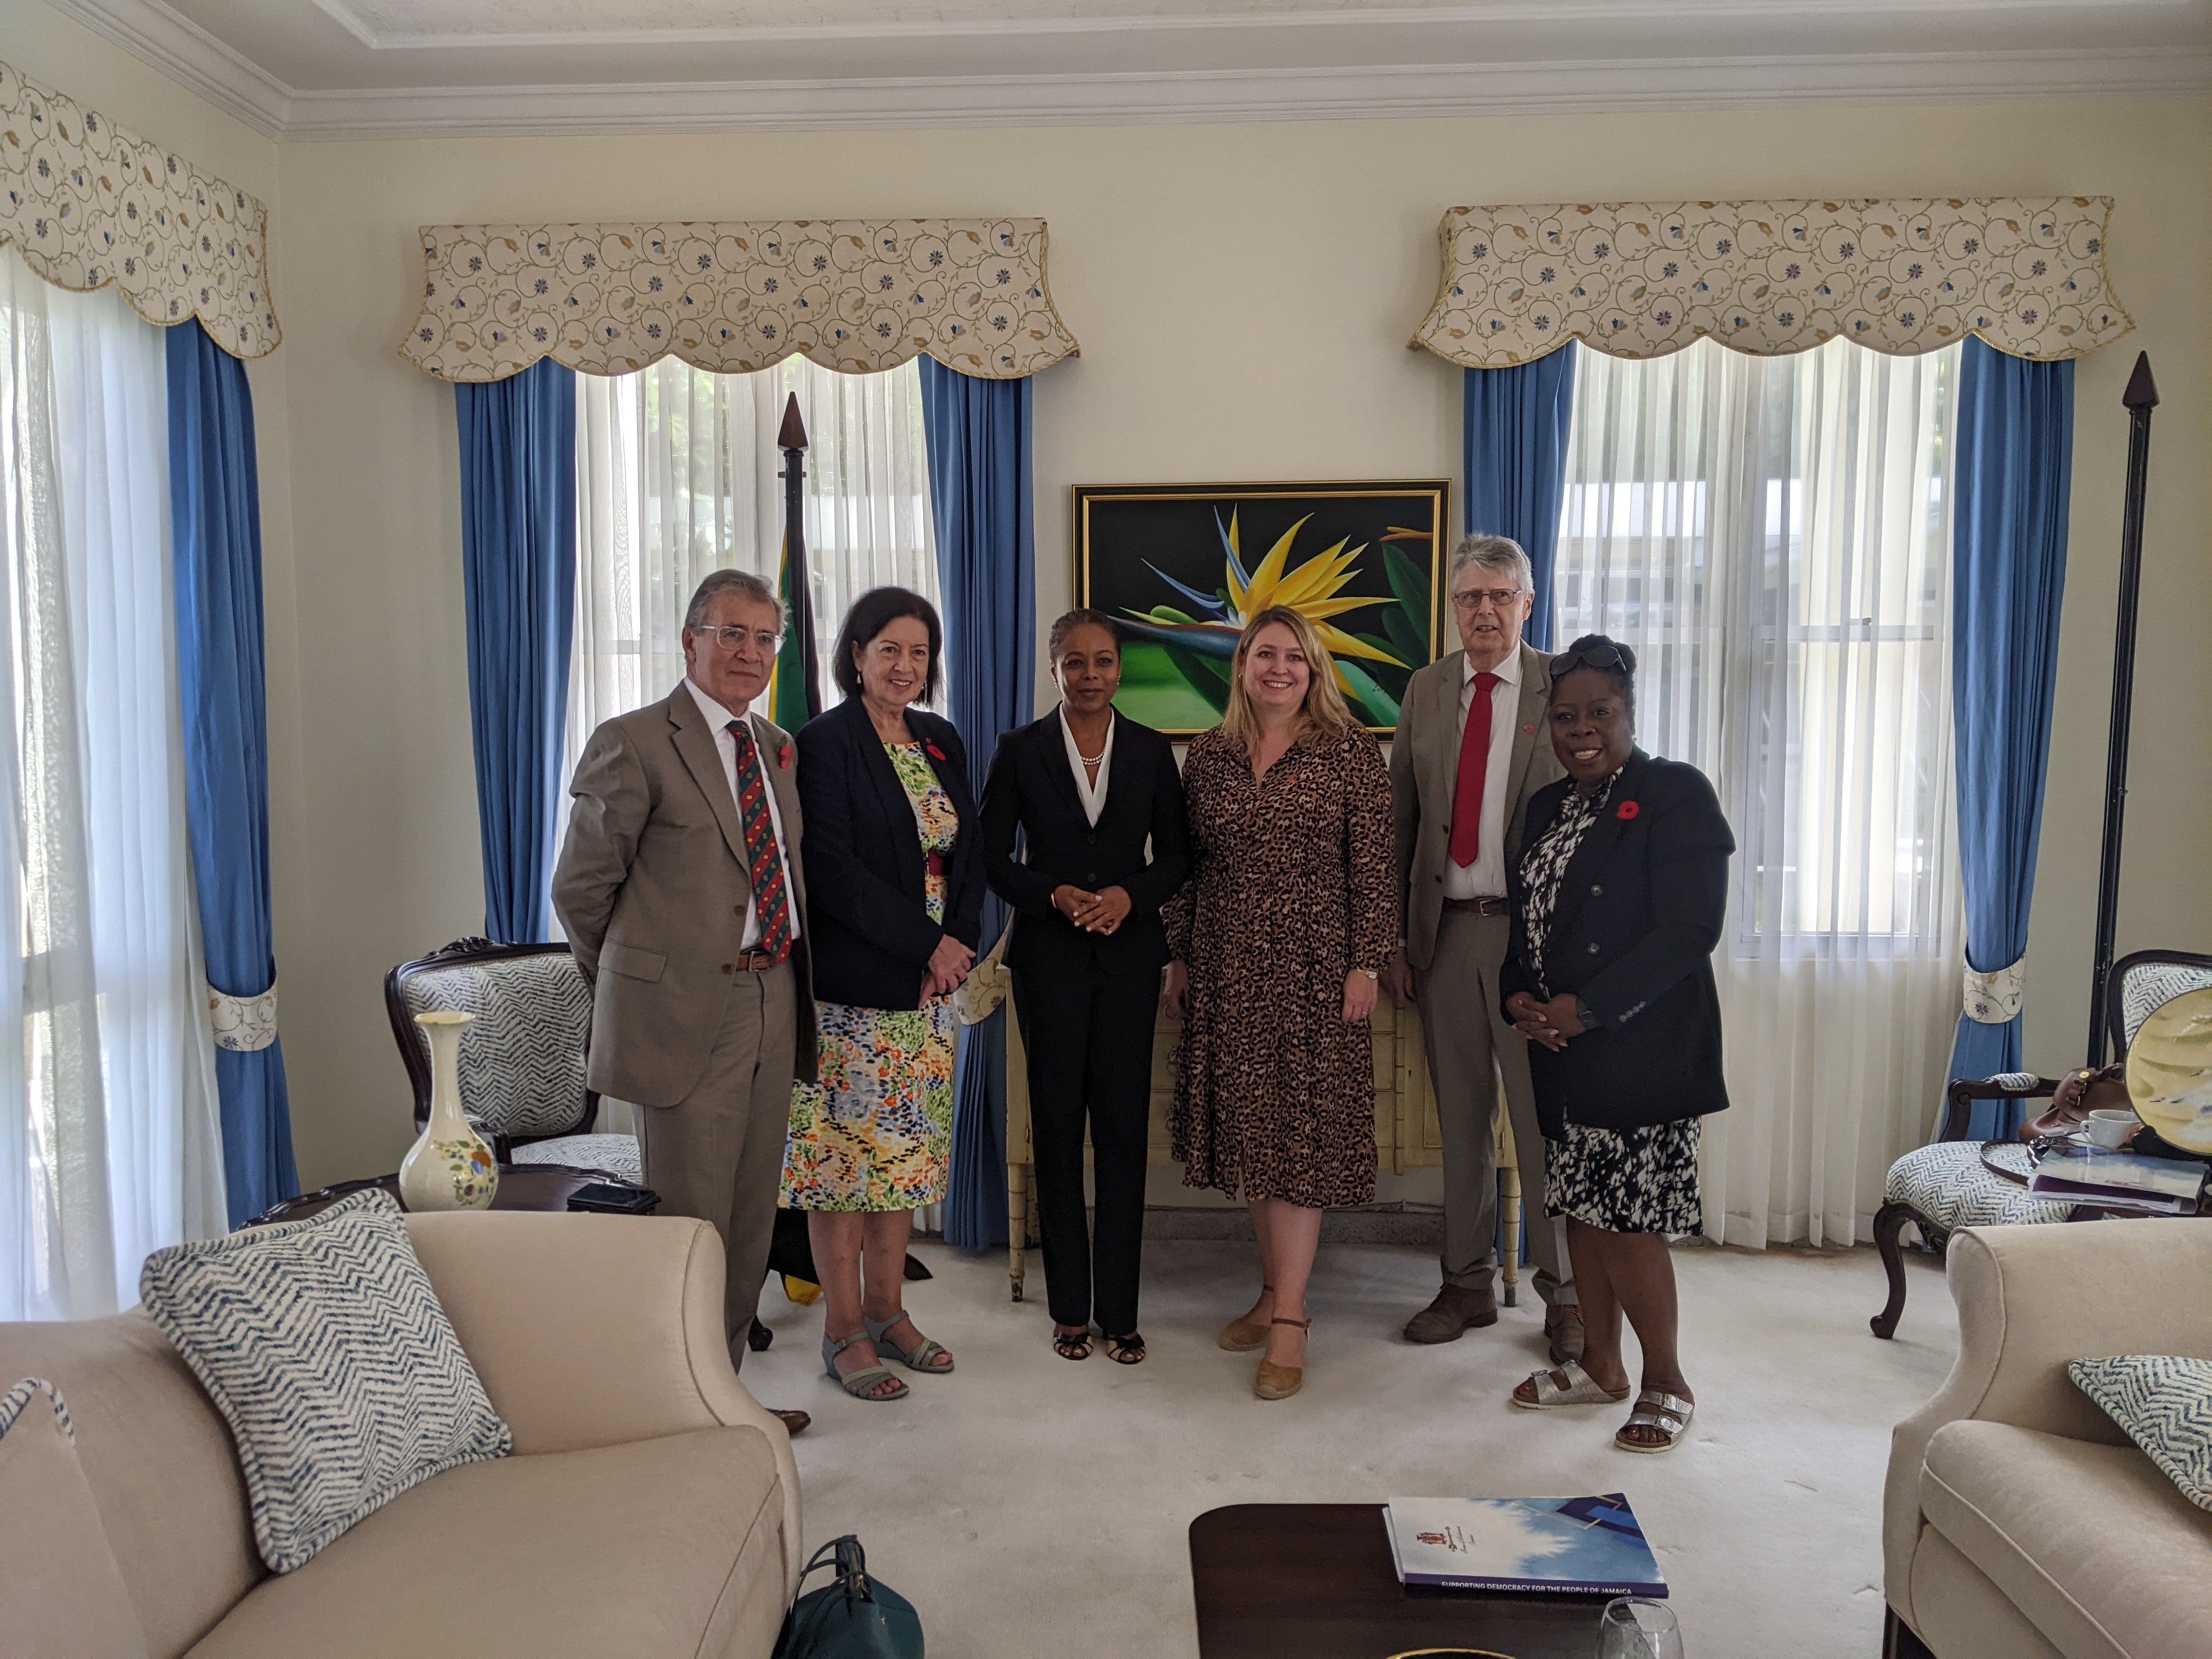 The delegation met with Marlene Malahoo Forte, QC, MP, JP, Minister of Legal and Constitutional Affairs